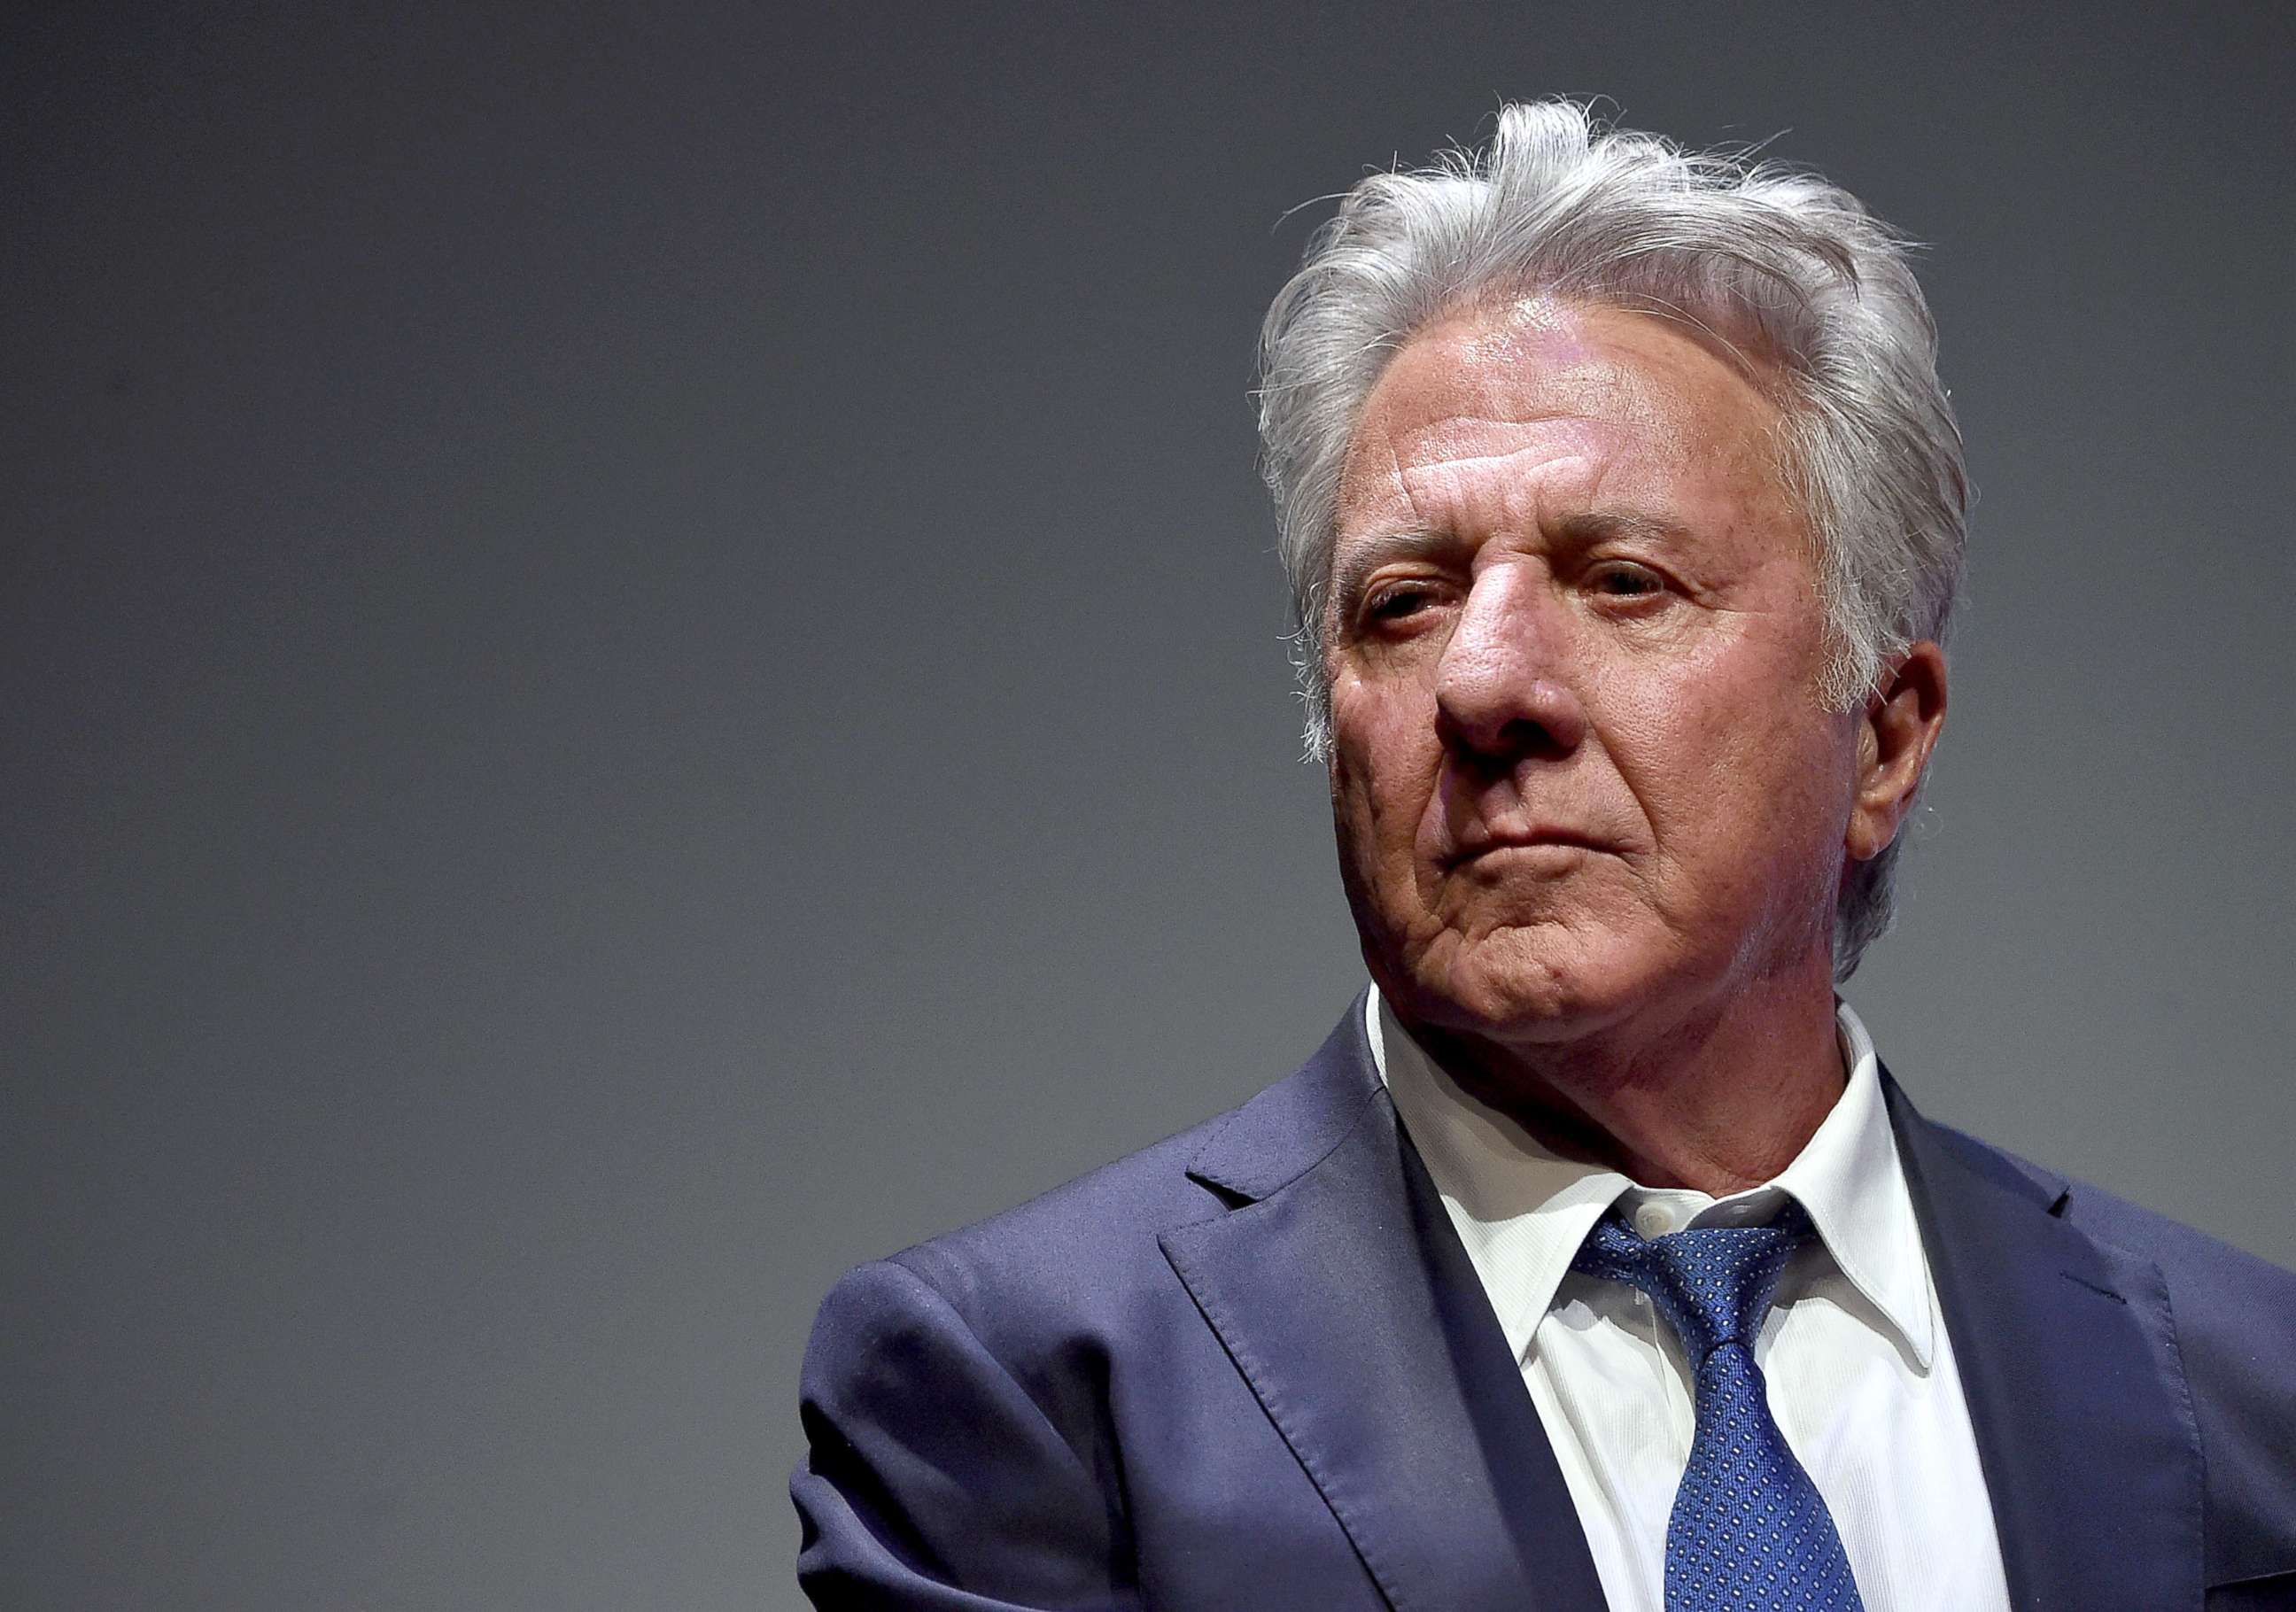 PHOTO: Dustin Hoffman attends the 55th New York Film Festival premiere of "Meyerowitz Stories" at Alice Tully Hall, Oct. 1, 2017, in New York City.